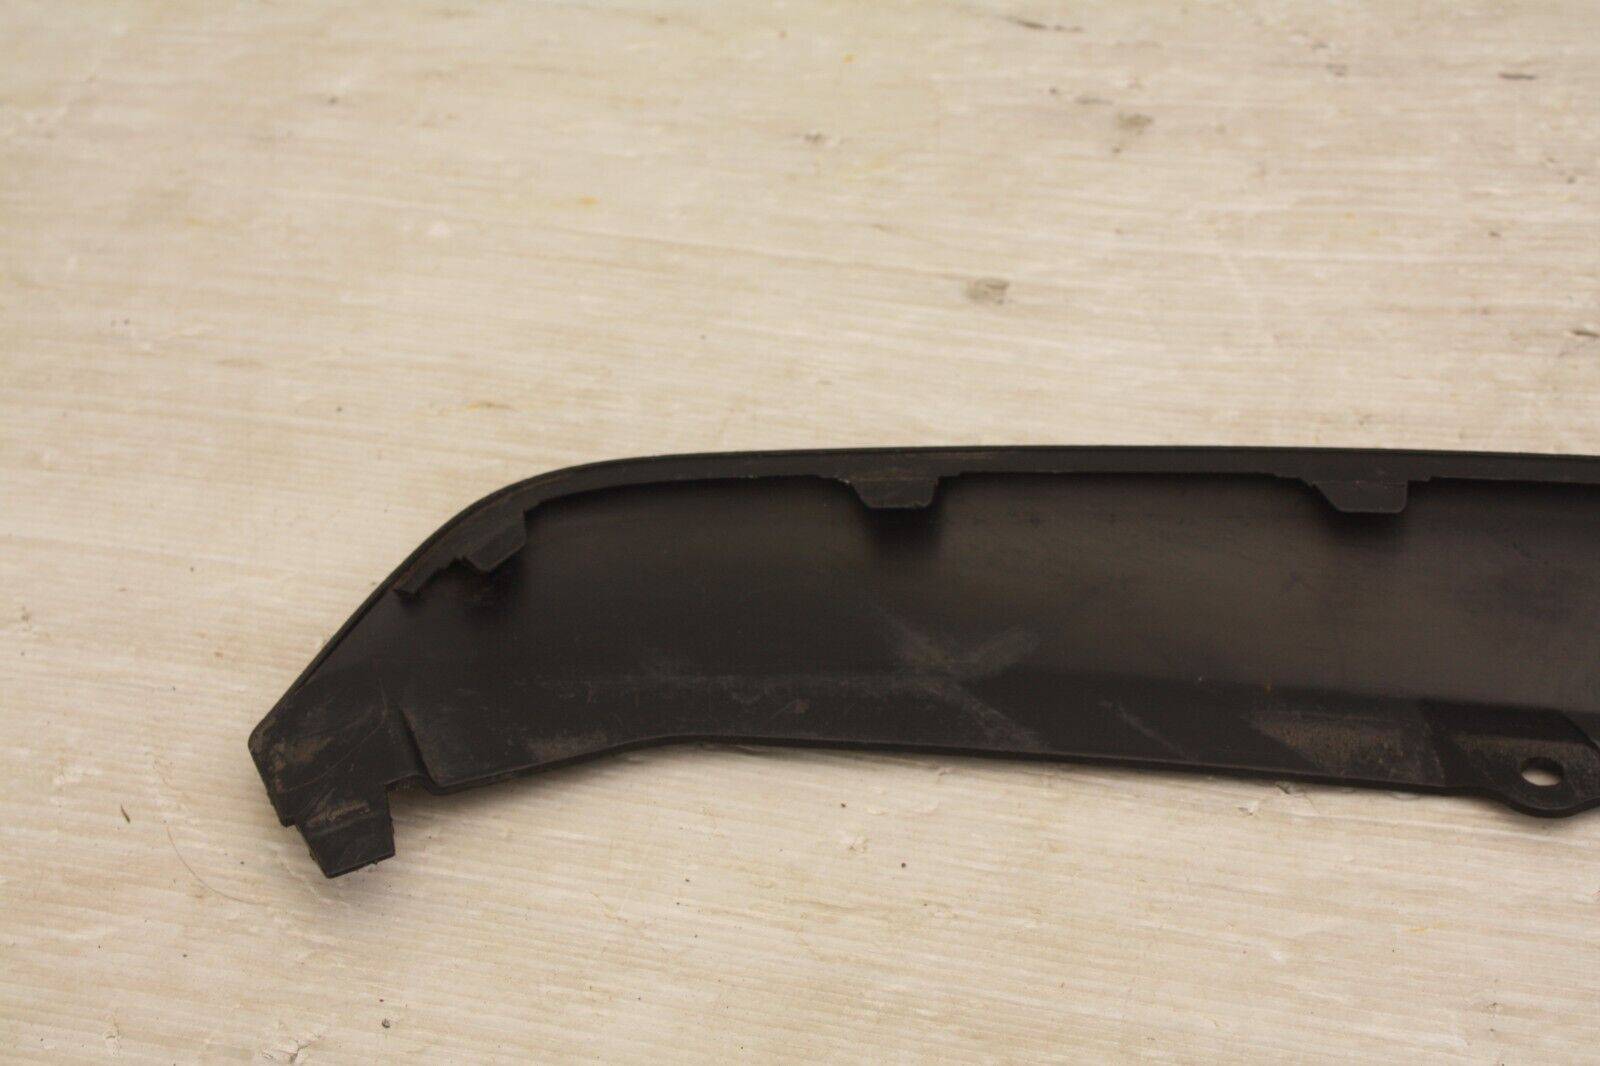 Ford-Focus-Front-Bumper-Right-Trim-2011-to-2014-BM51-17626-A-Genuine-176167217006-14